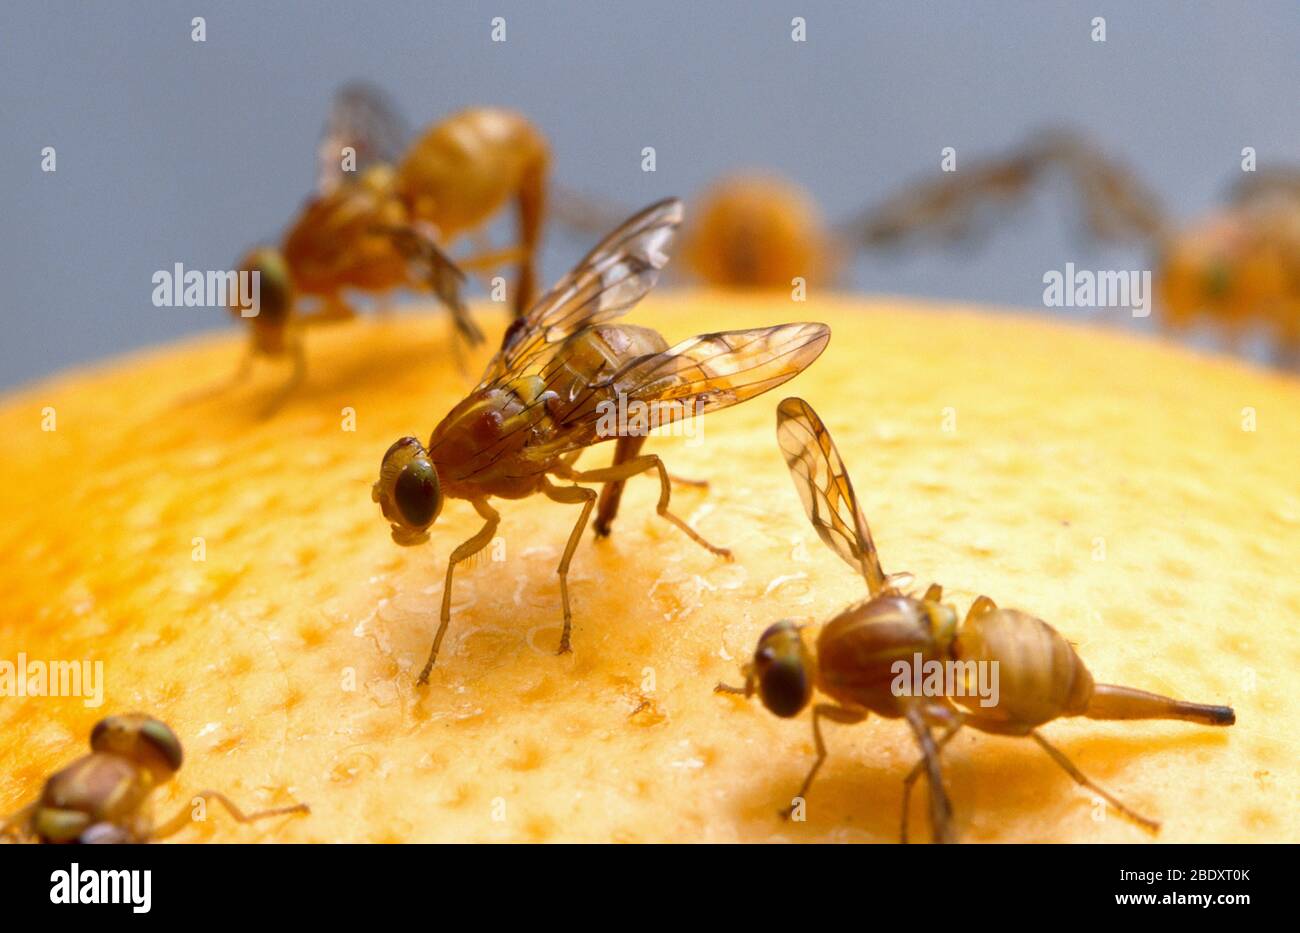 Mexican Fruit Fly Stock Photo